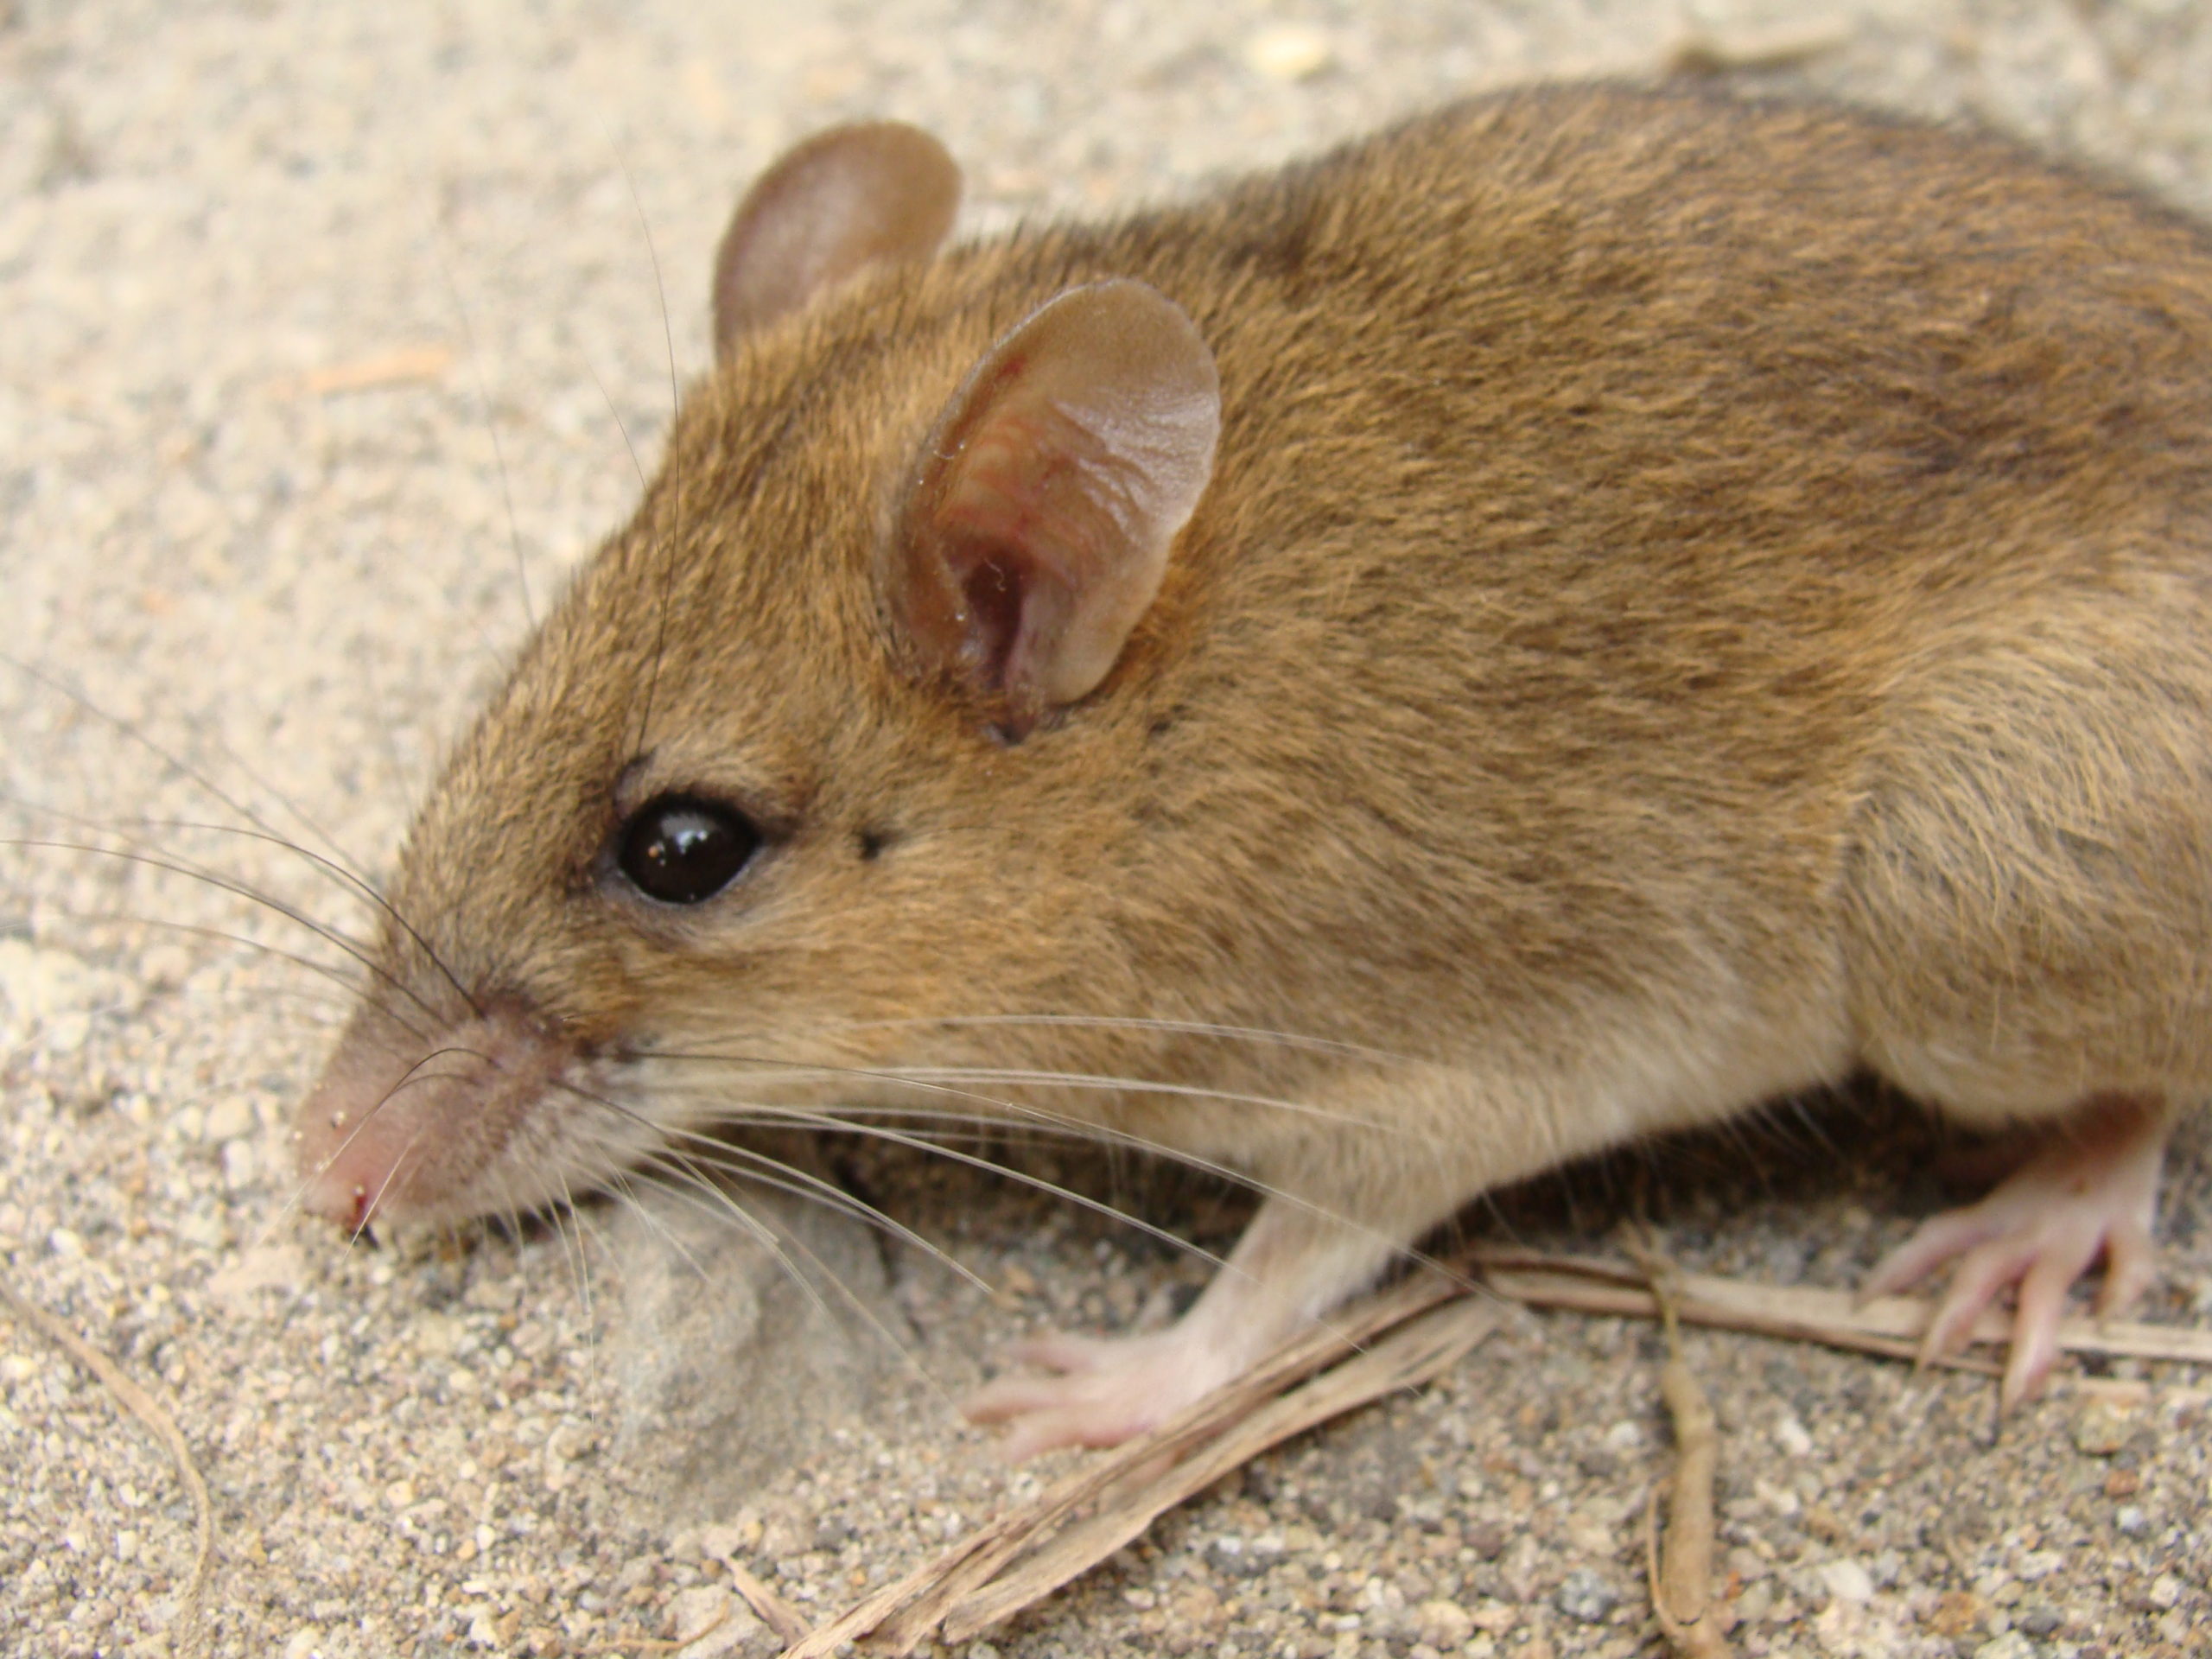 It's also known as the long-nosed Luzon forest mouse. (Image: © Danny Balete, Field Museum)